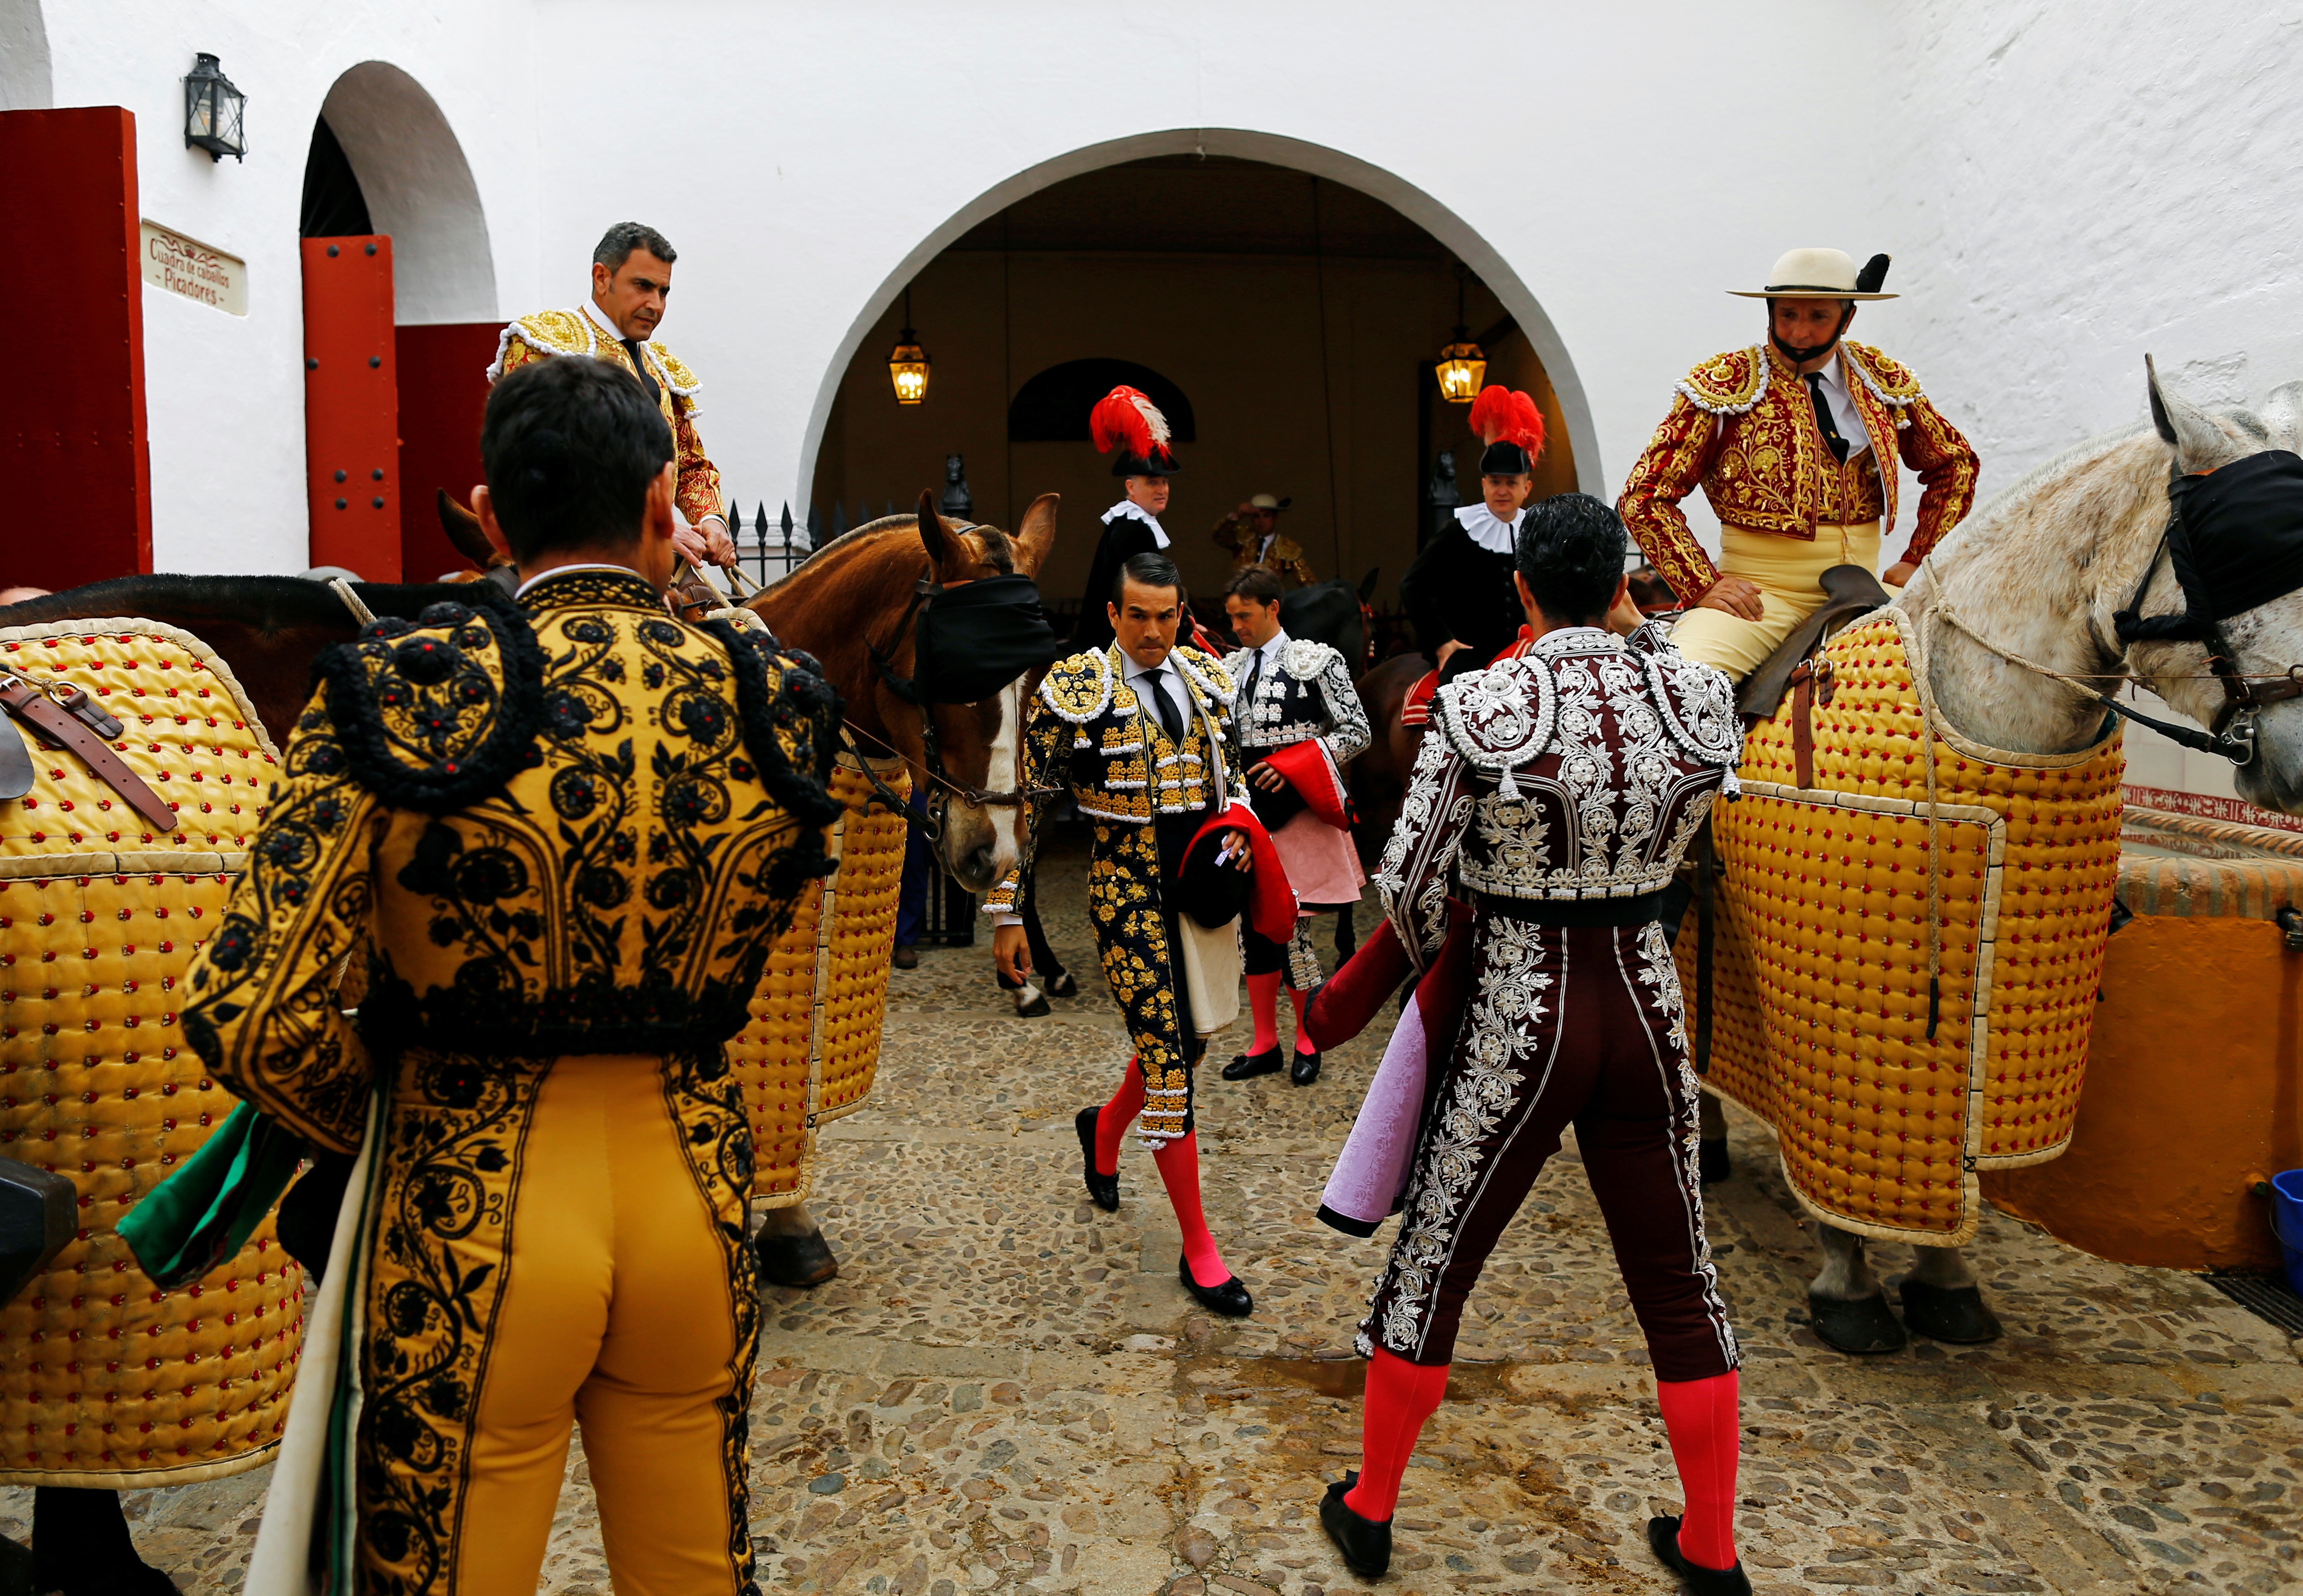 Famous matadors perform talents during a bullfight in Seville